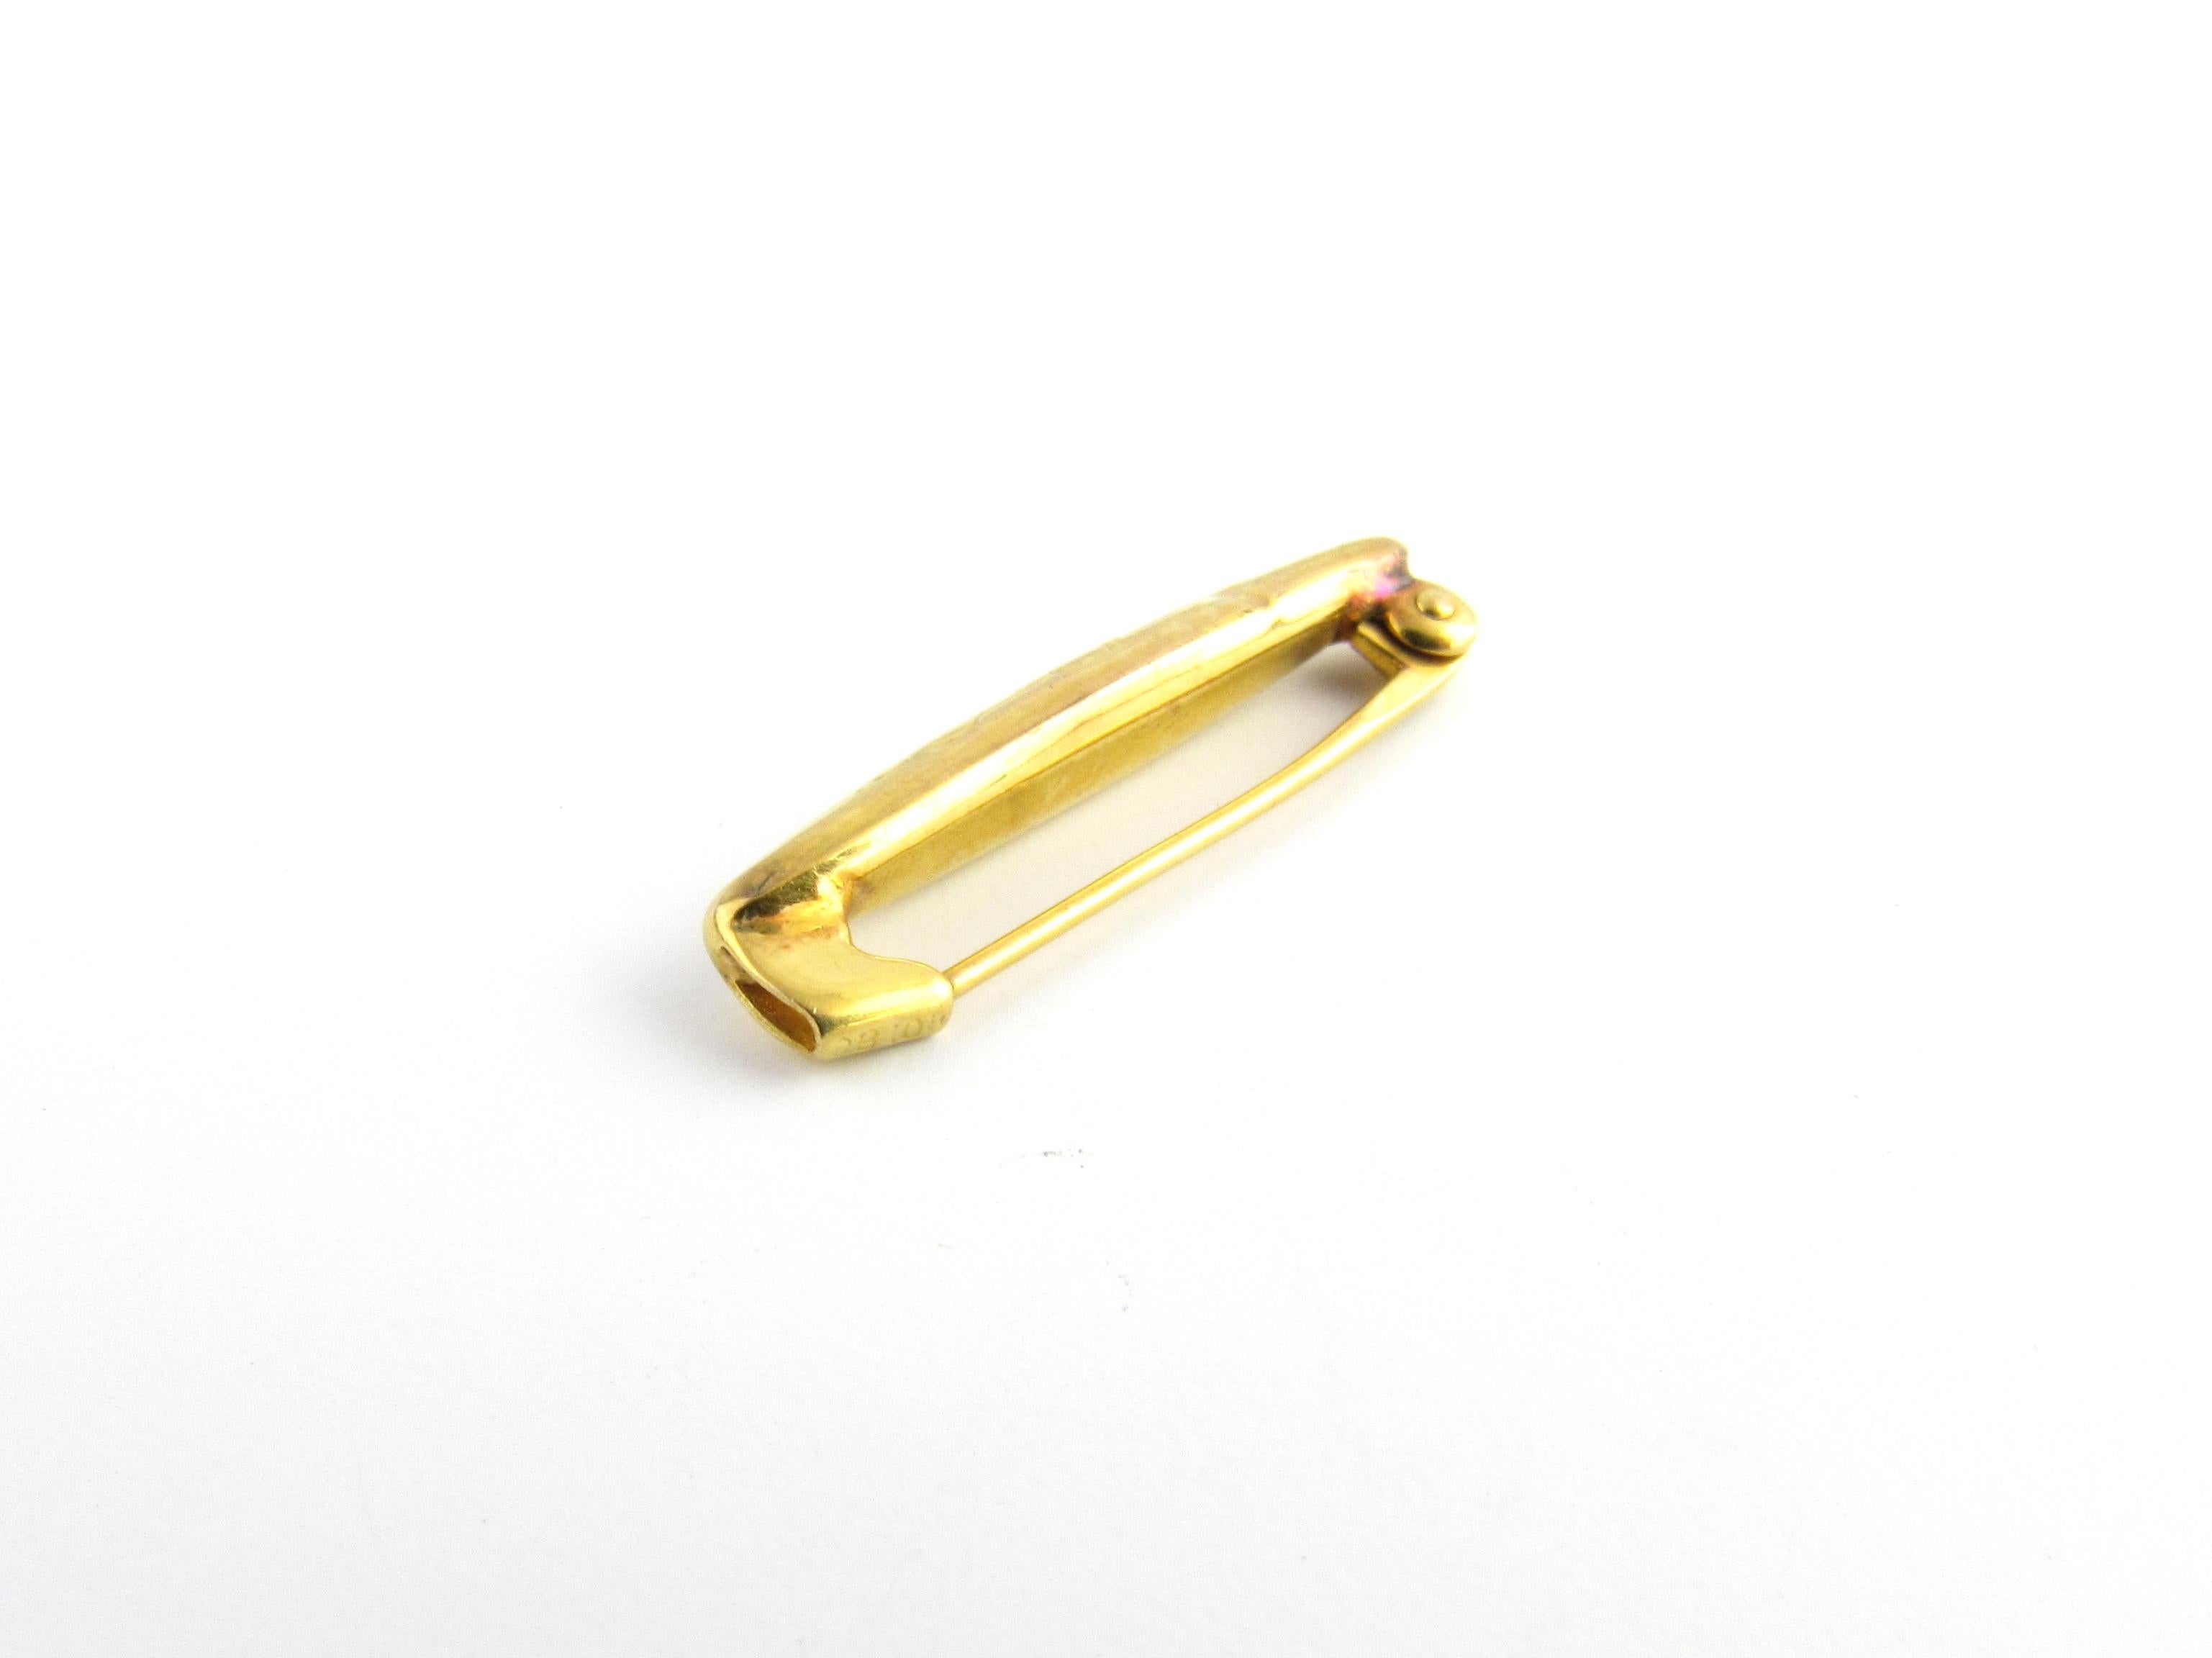 10K Yellow Gold Ostby Barton Floral Pin Brooch
7/8 